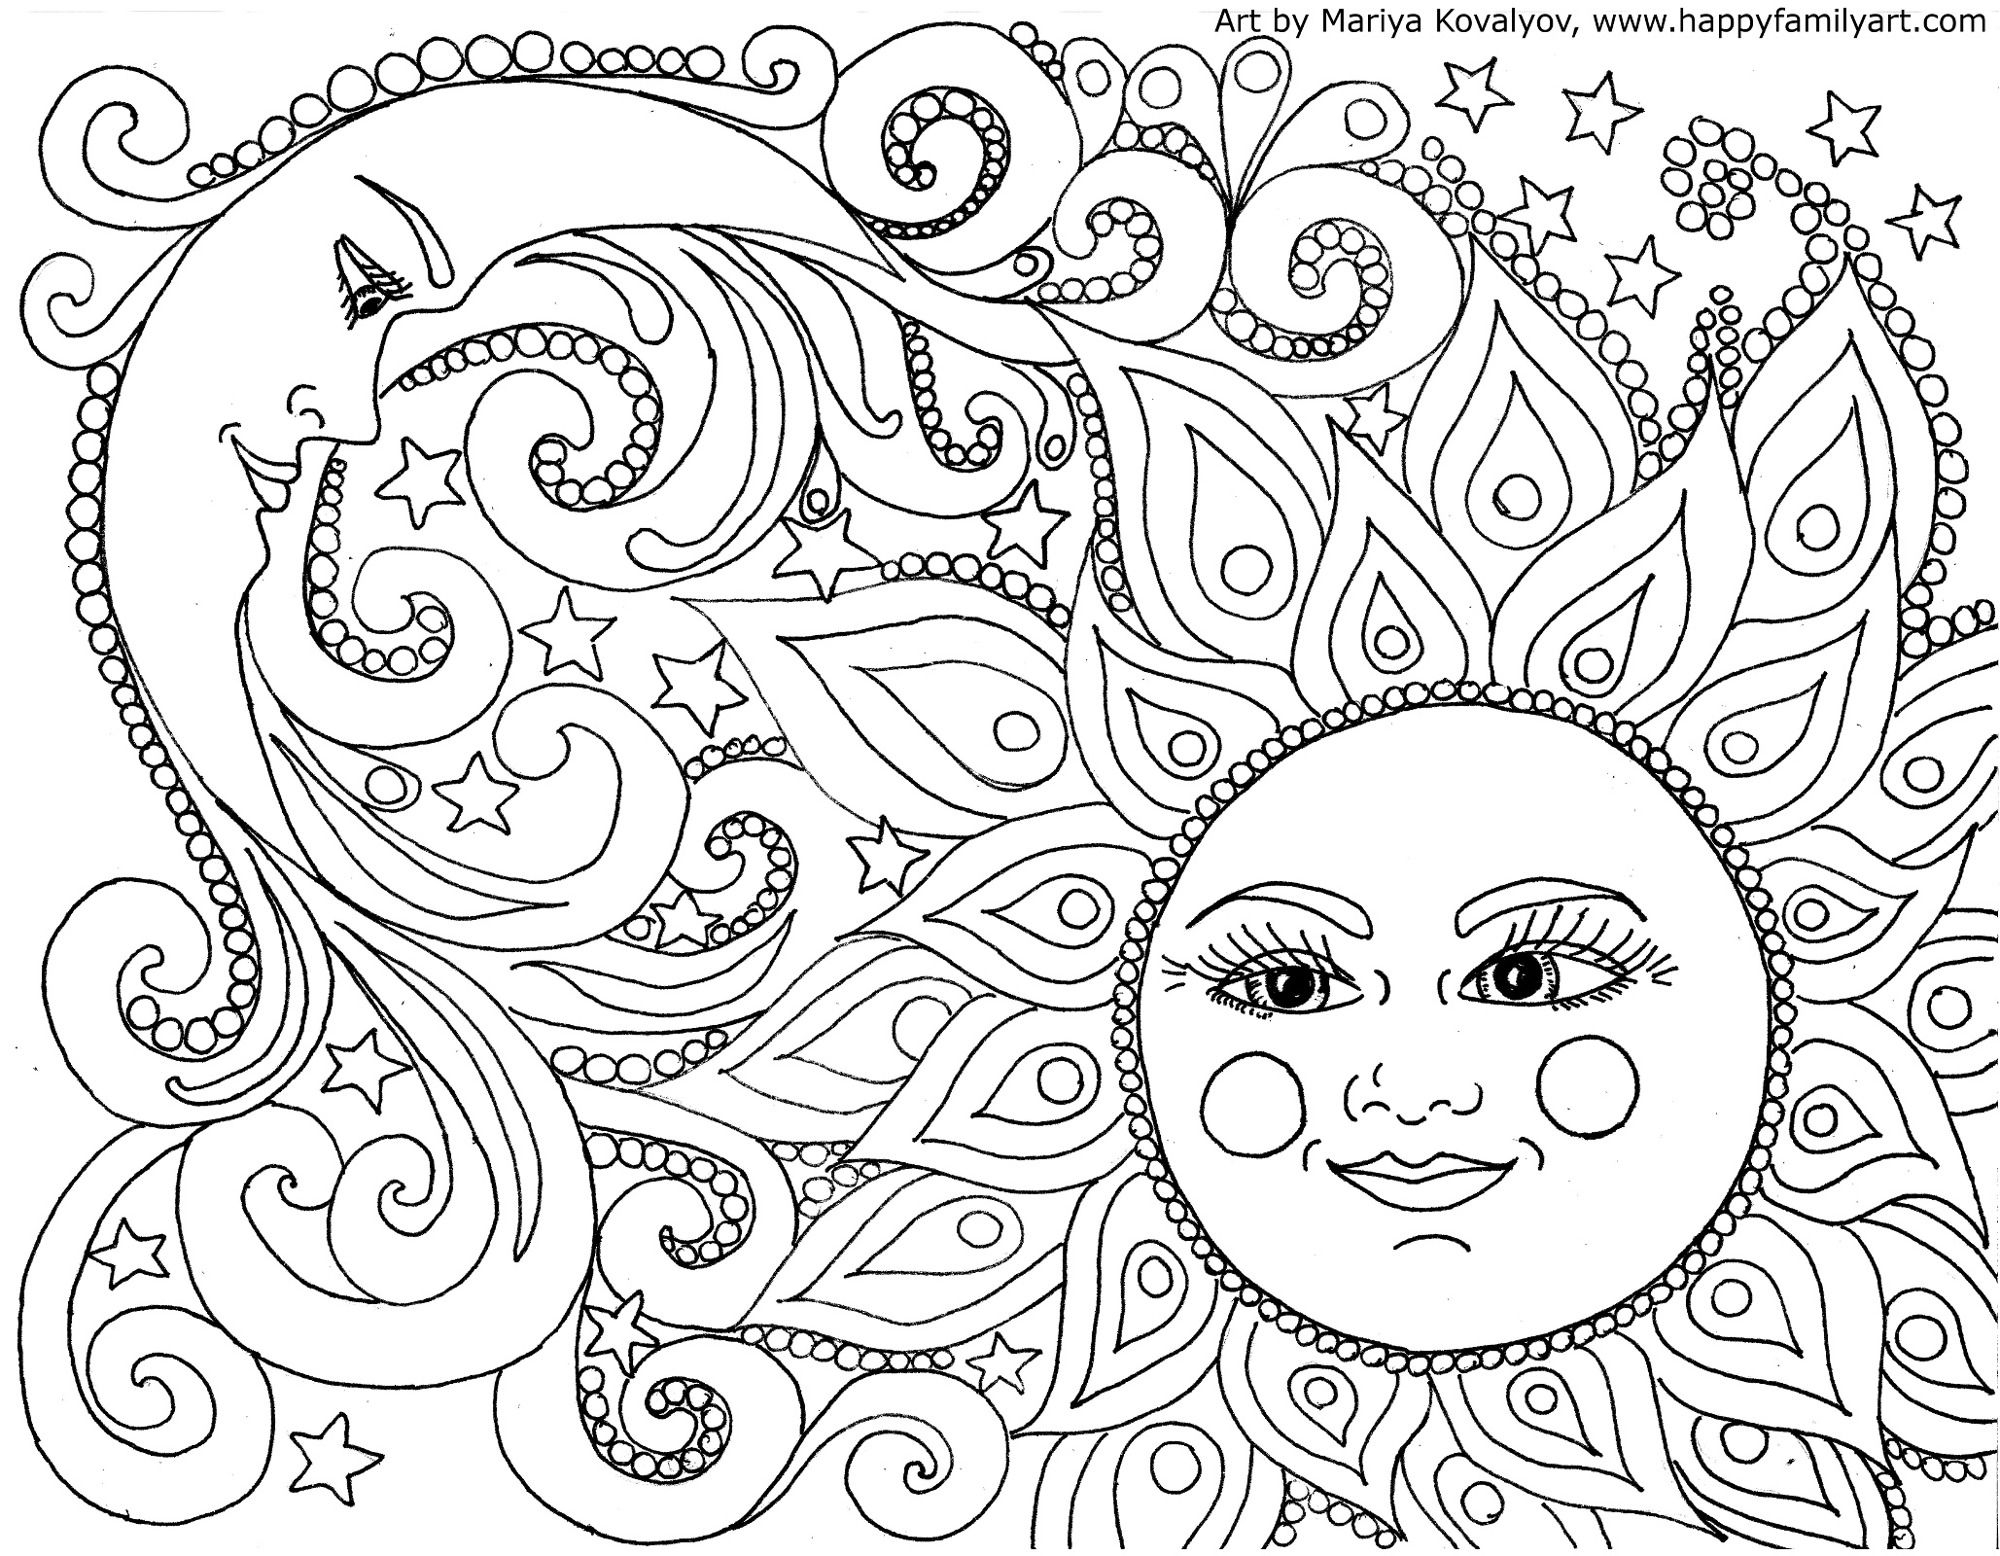 Zen Coloring Pages   Coloring Home